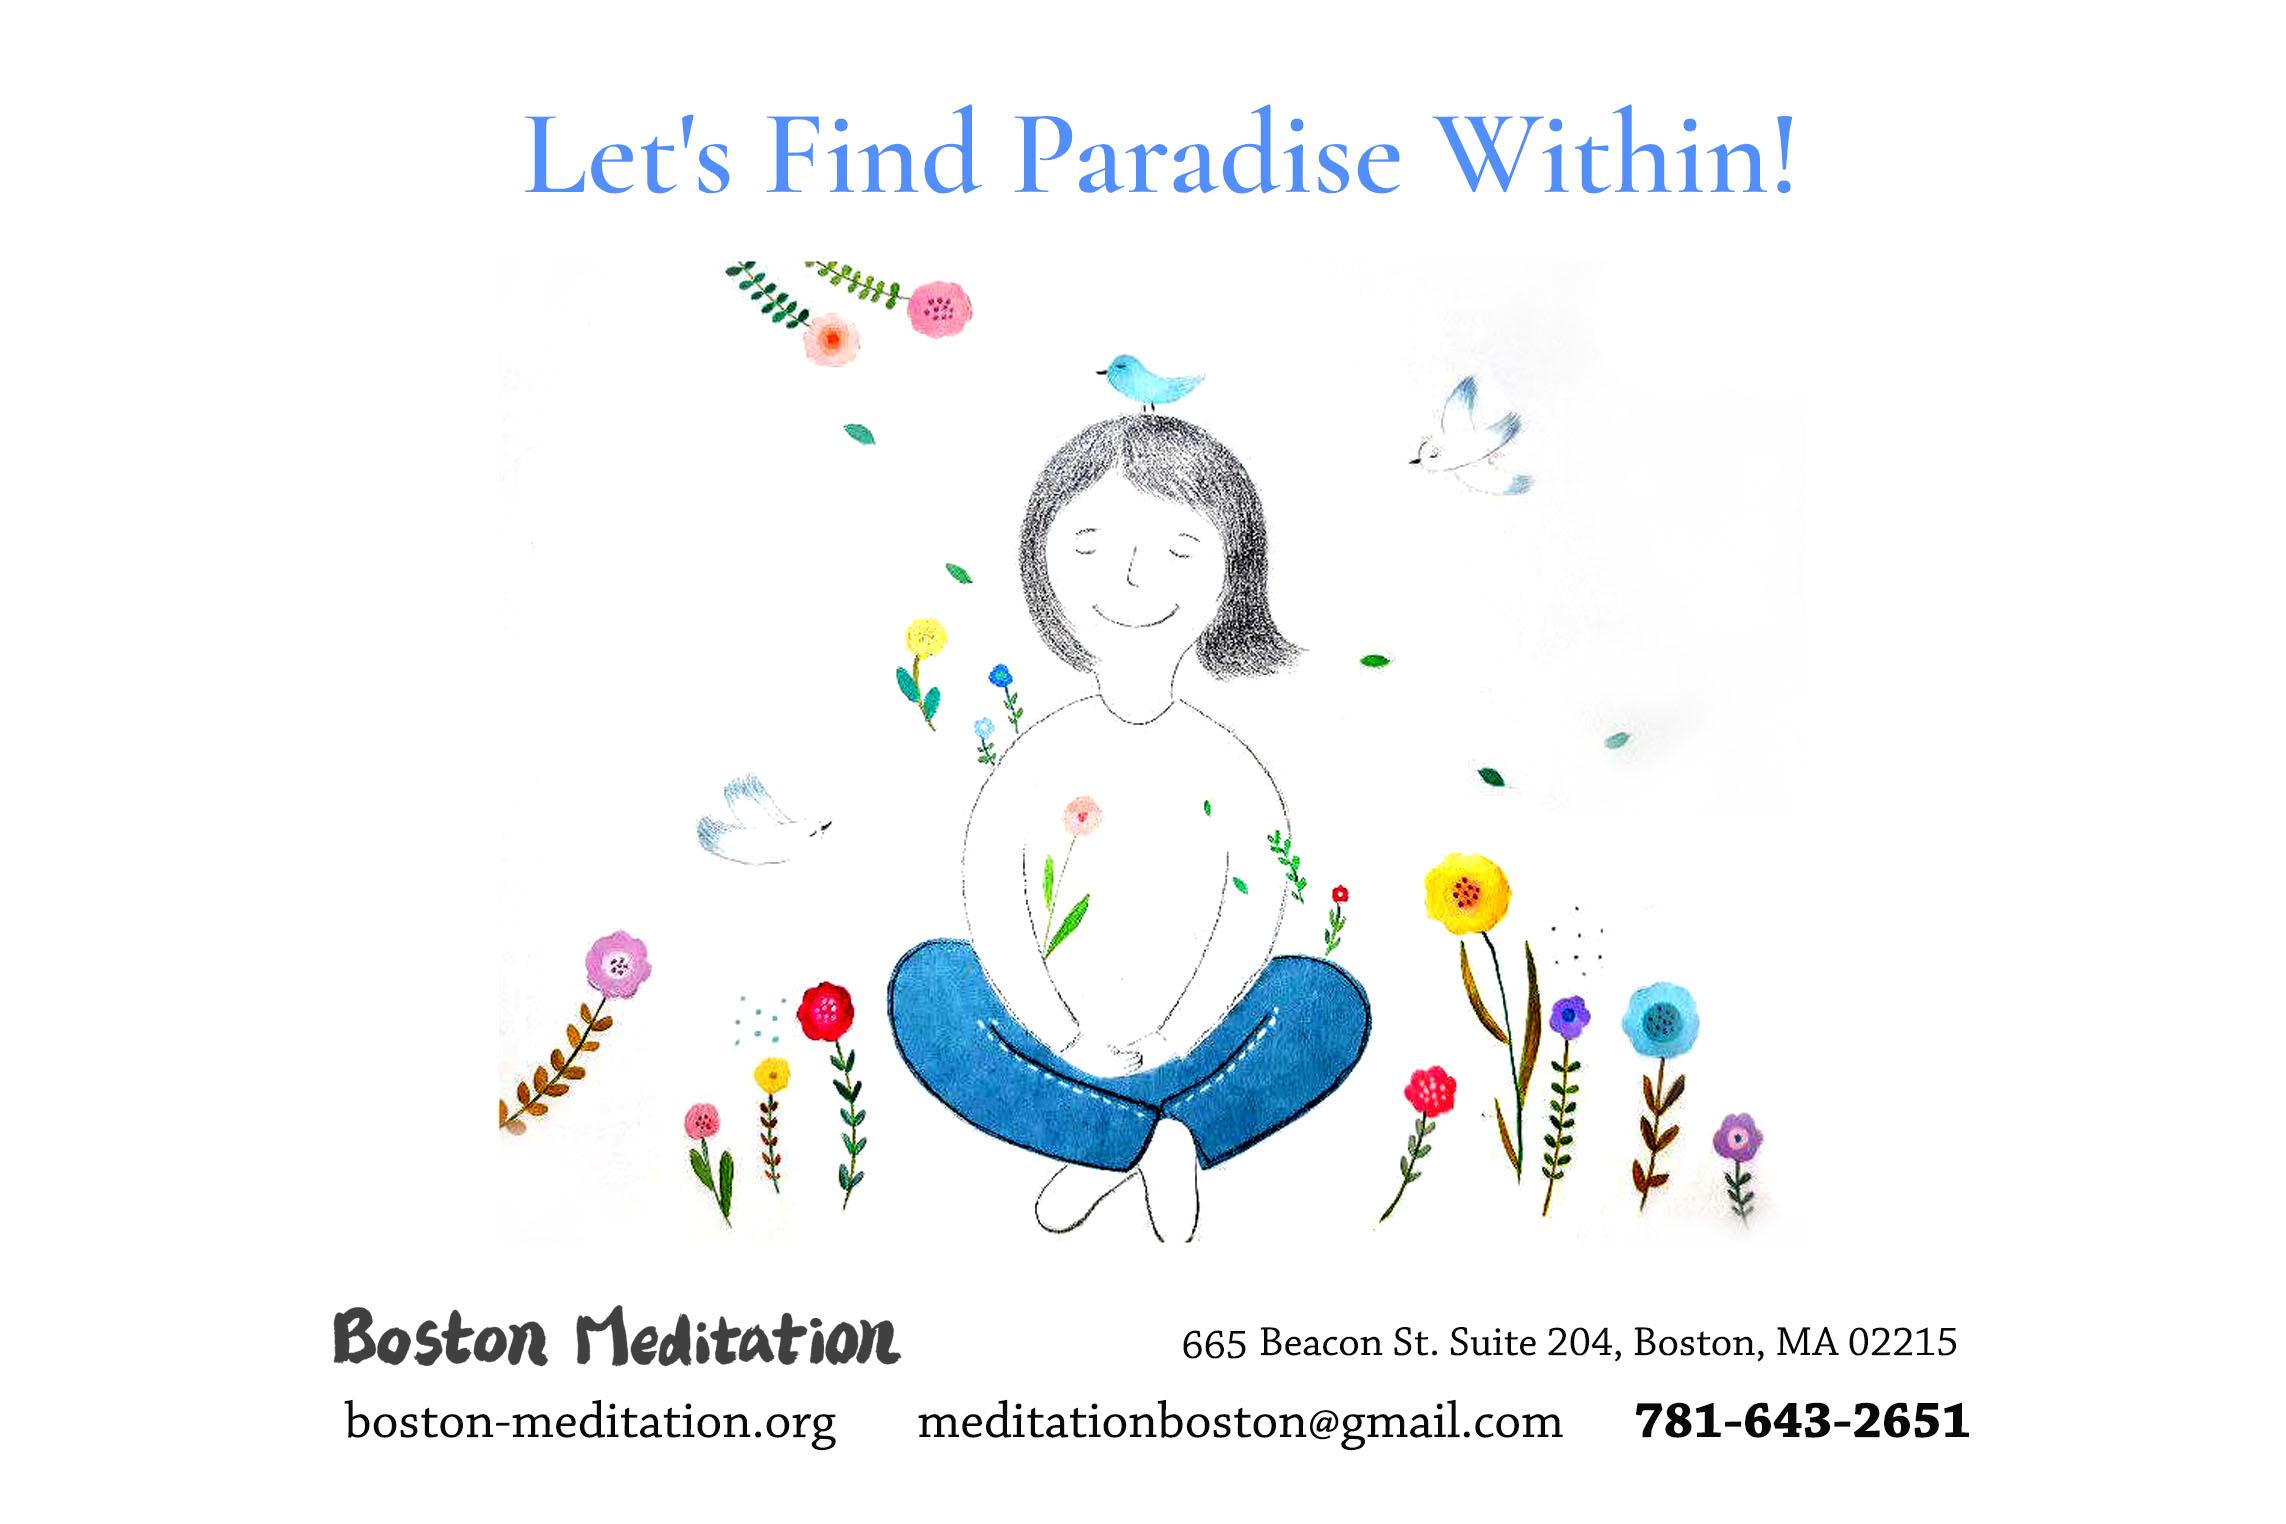 Let's Find Paradise Within